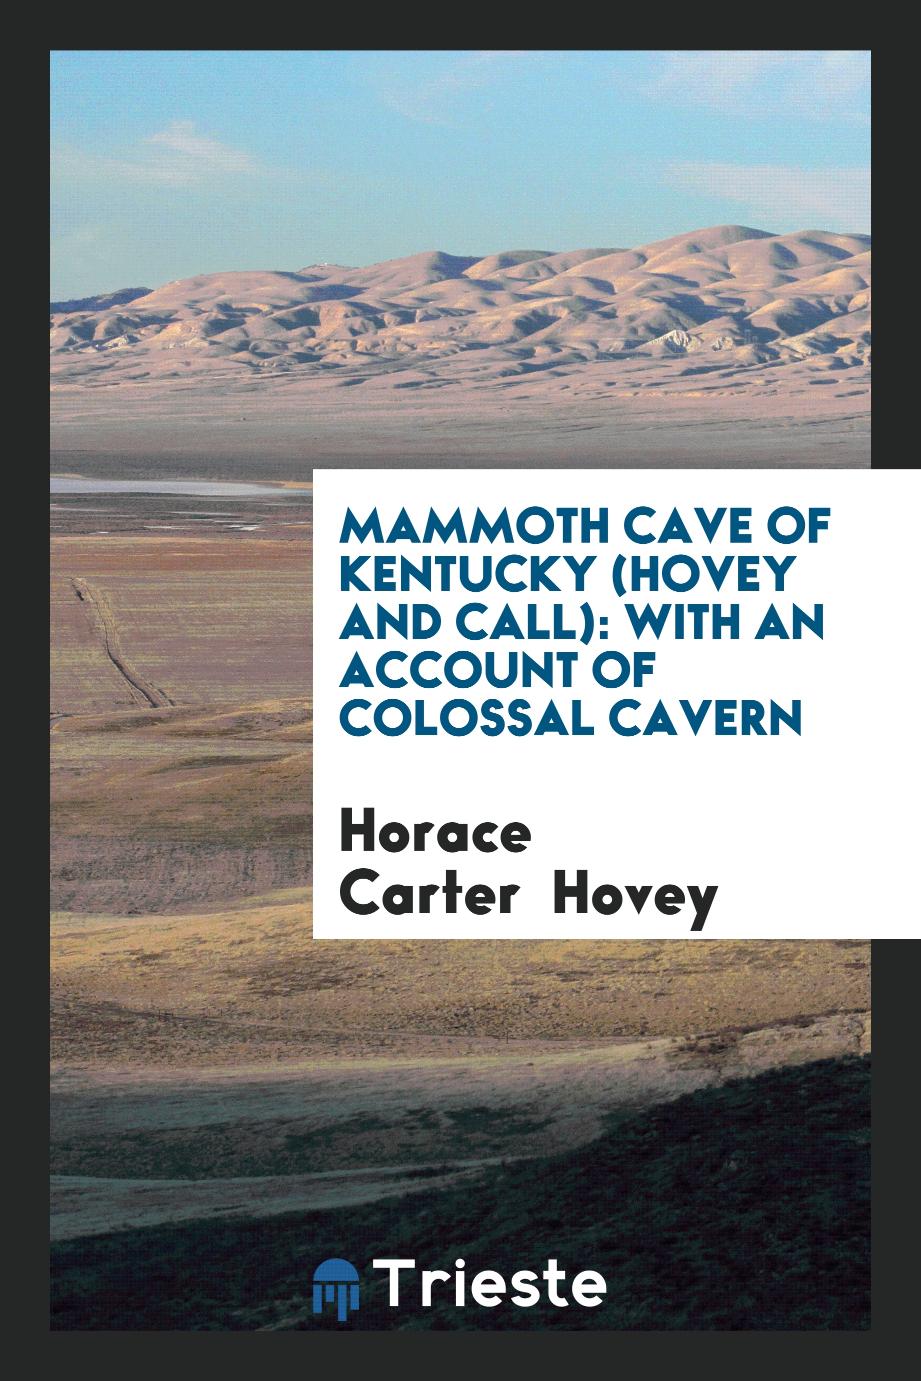 Mammoth Cave of Kentucky (Hovey and Call): With an Account of Colossal Cavern